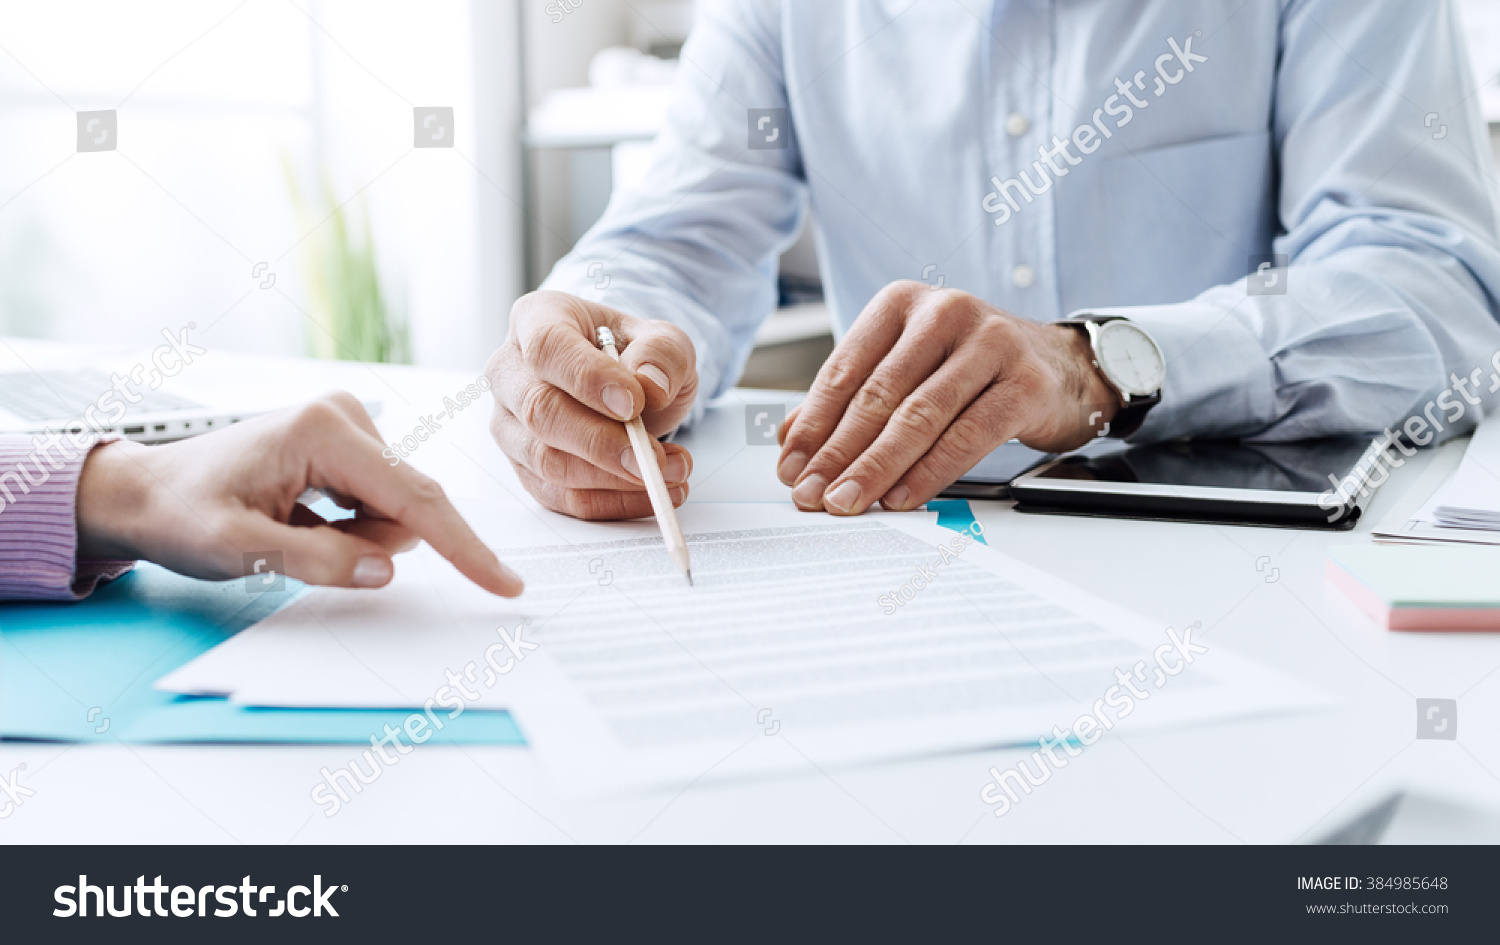 Business people negotiating a contract, they are pointing on a document and discussing together #384985648